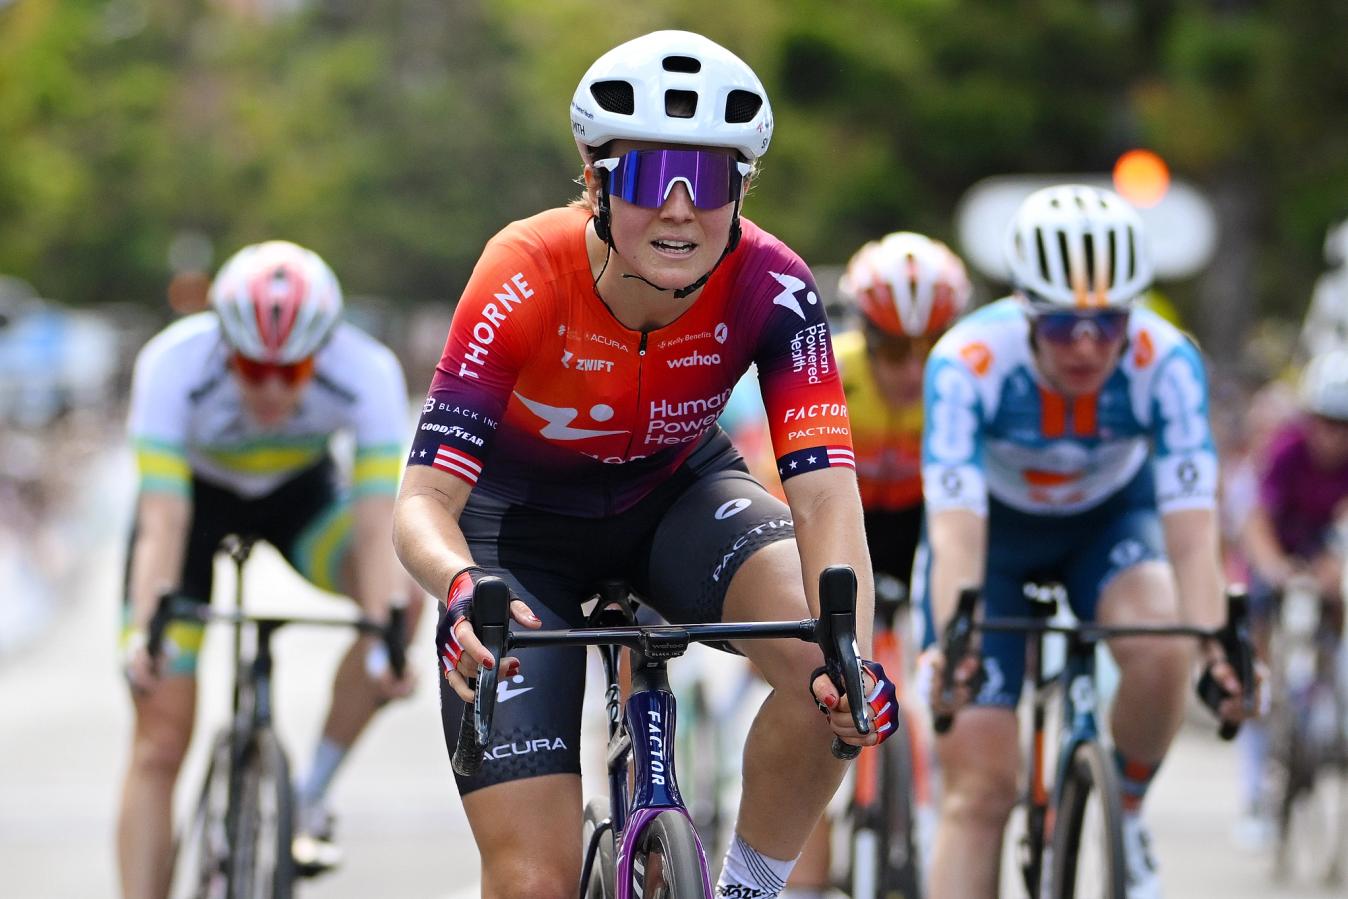 Ruth Edwards is perhaps the most high-profile signing for Human Powered Health, with the American coming out of retirement to ride in the team's distinctive orange